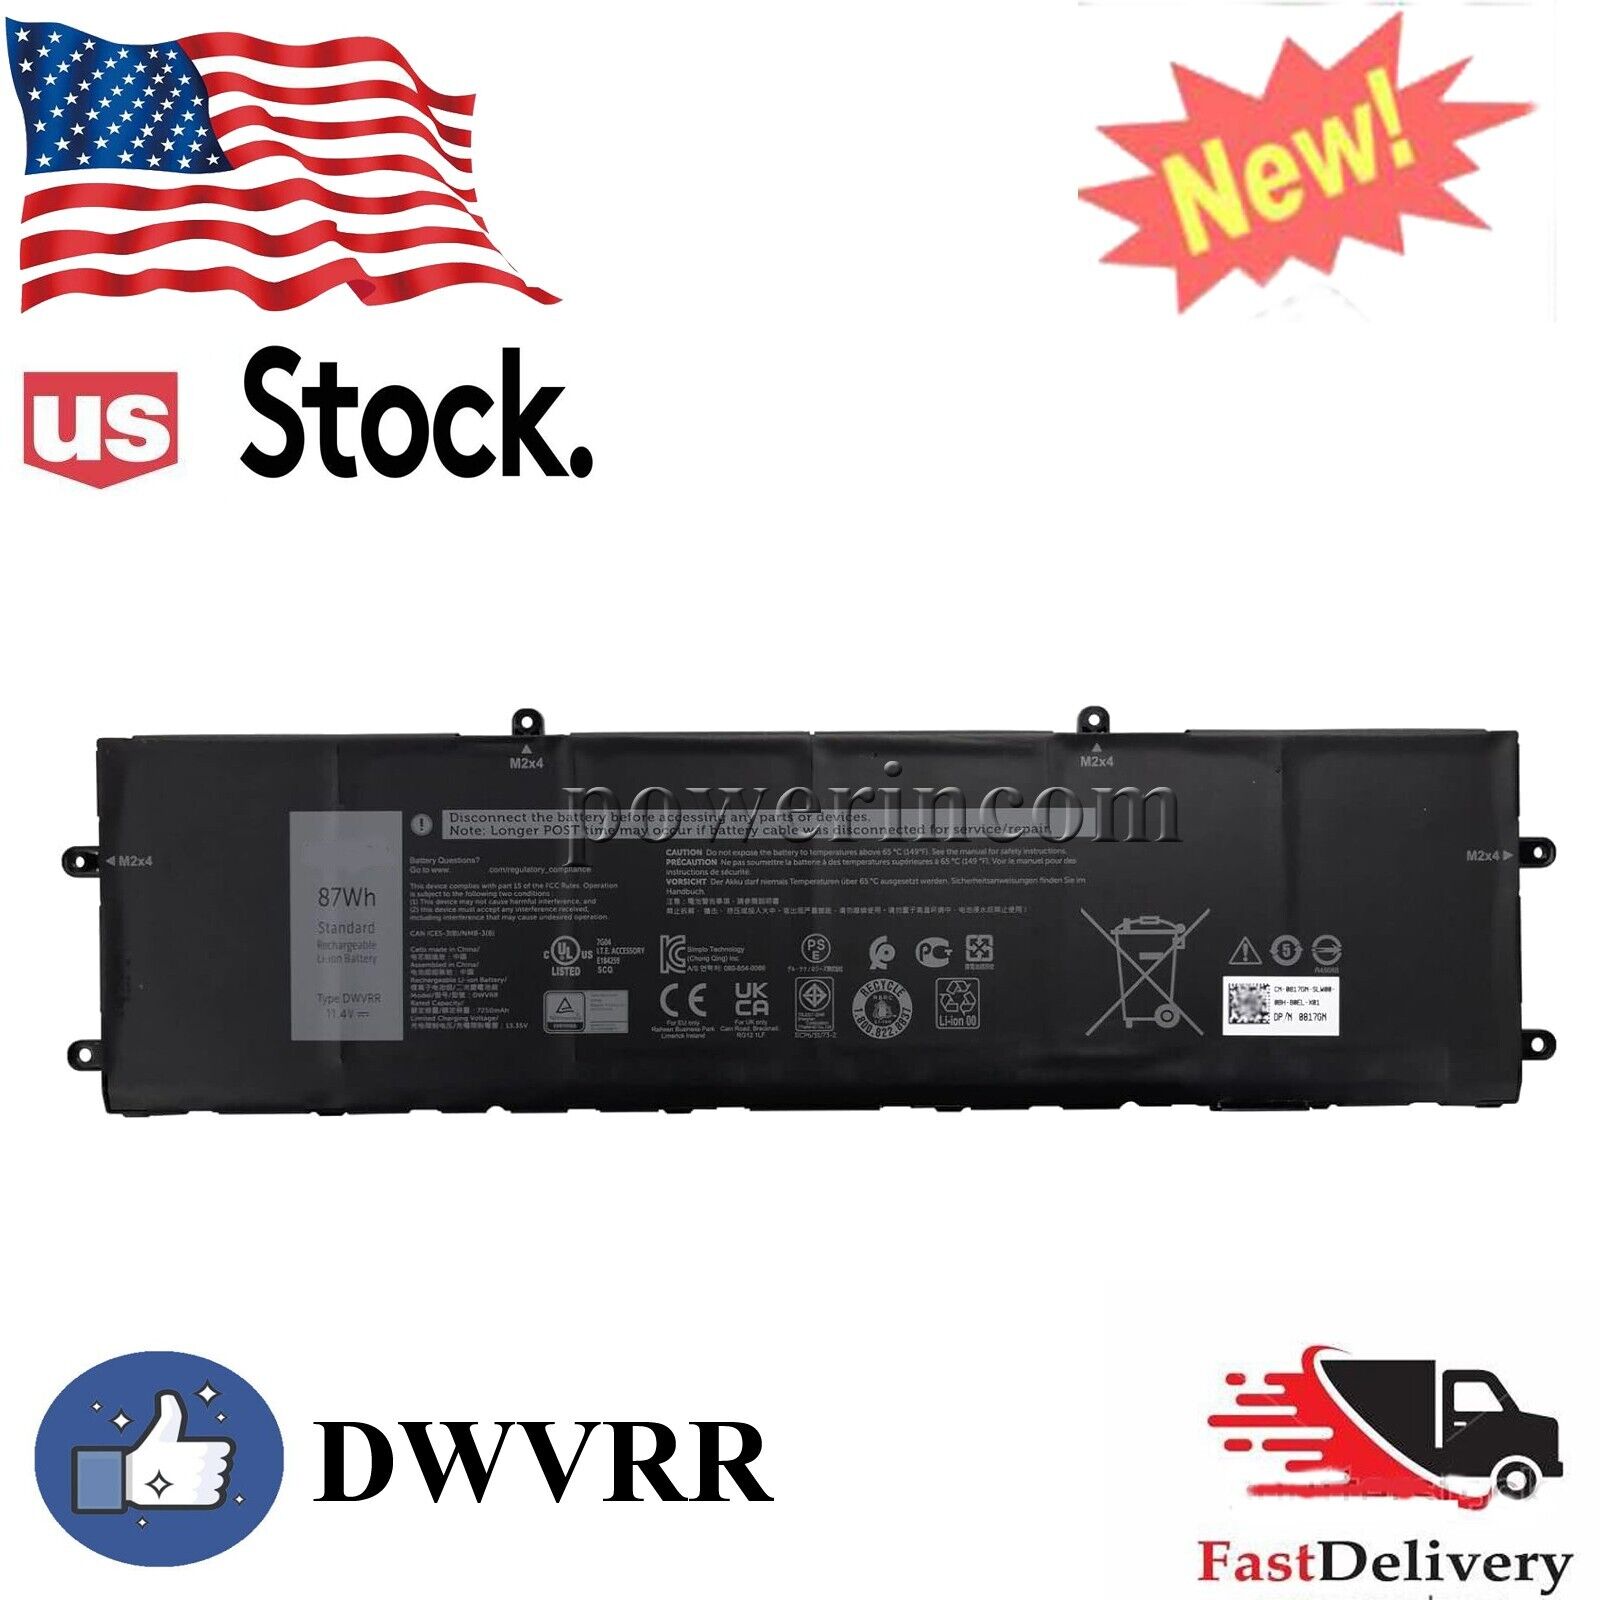 New DWVRR Battery for Alienware X15 R1 NAWX15R101 Inspiron 16 7620 2-in-1